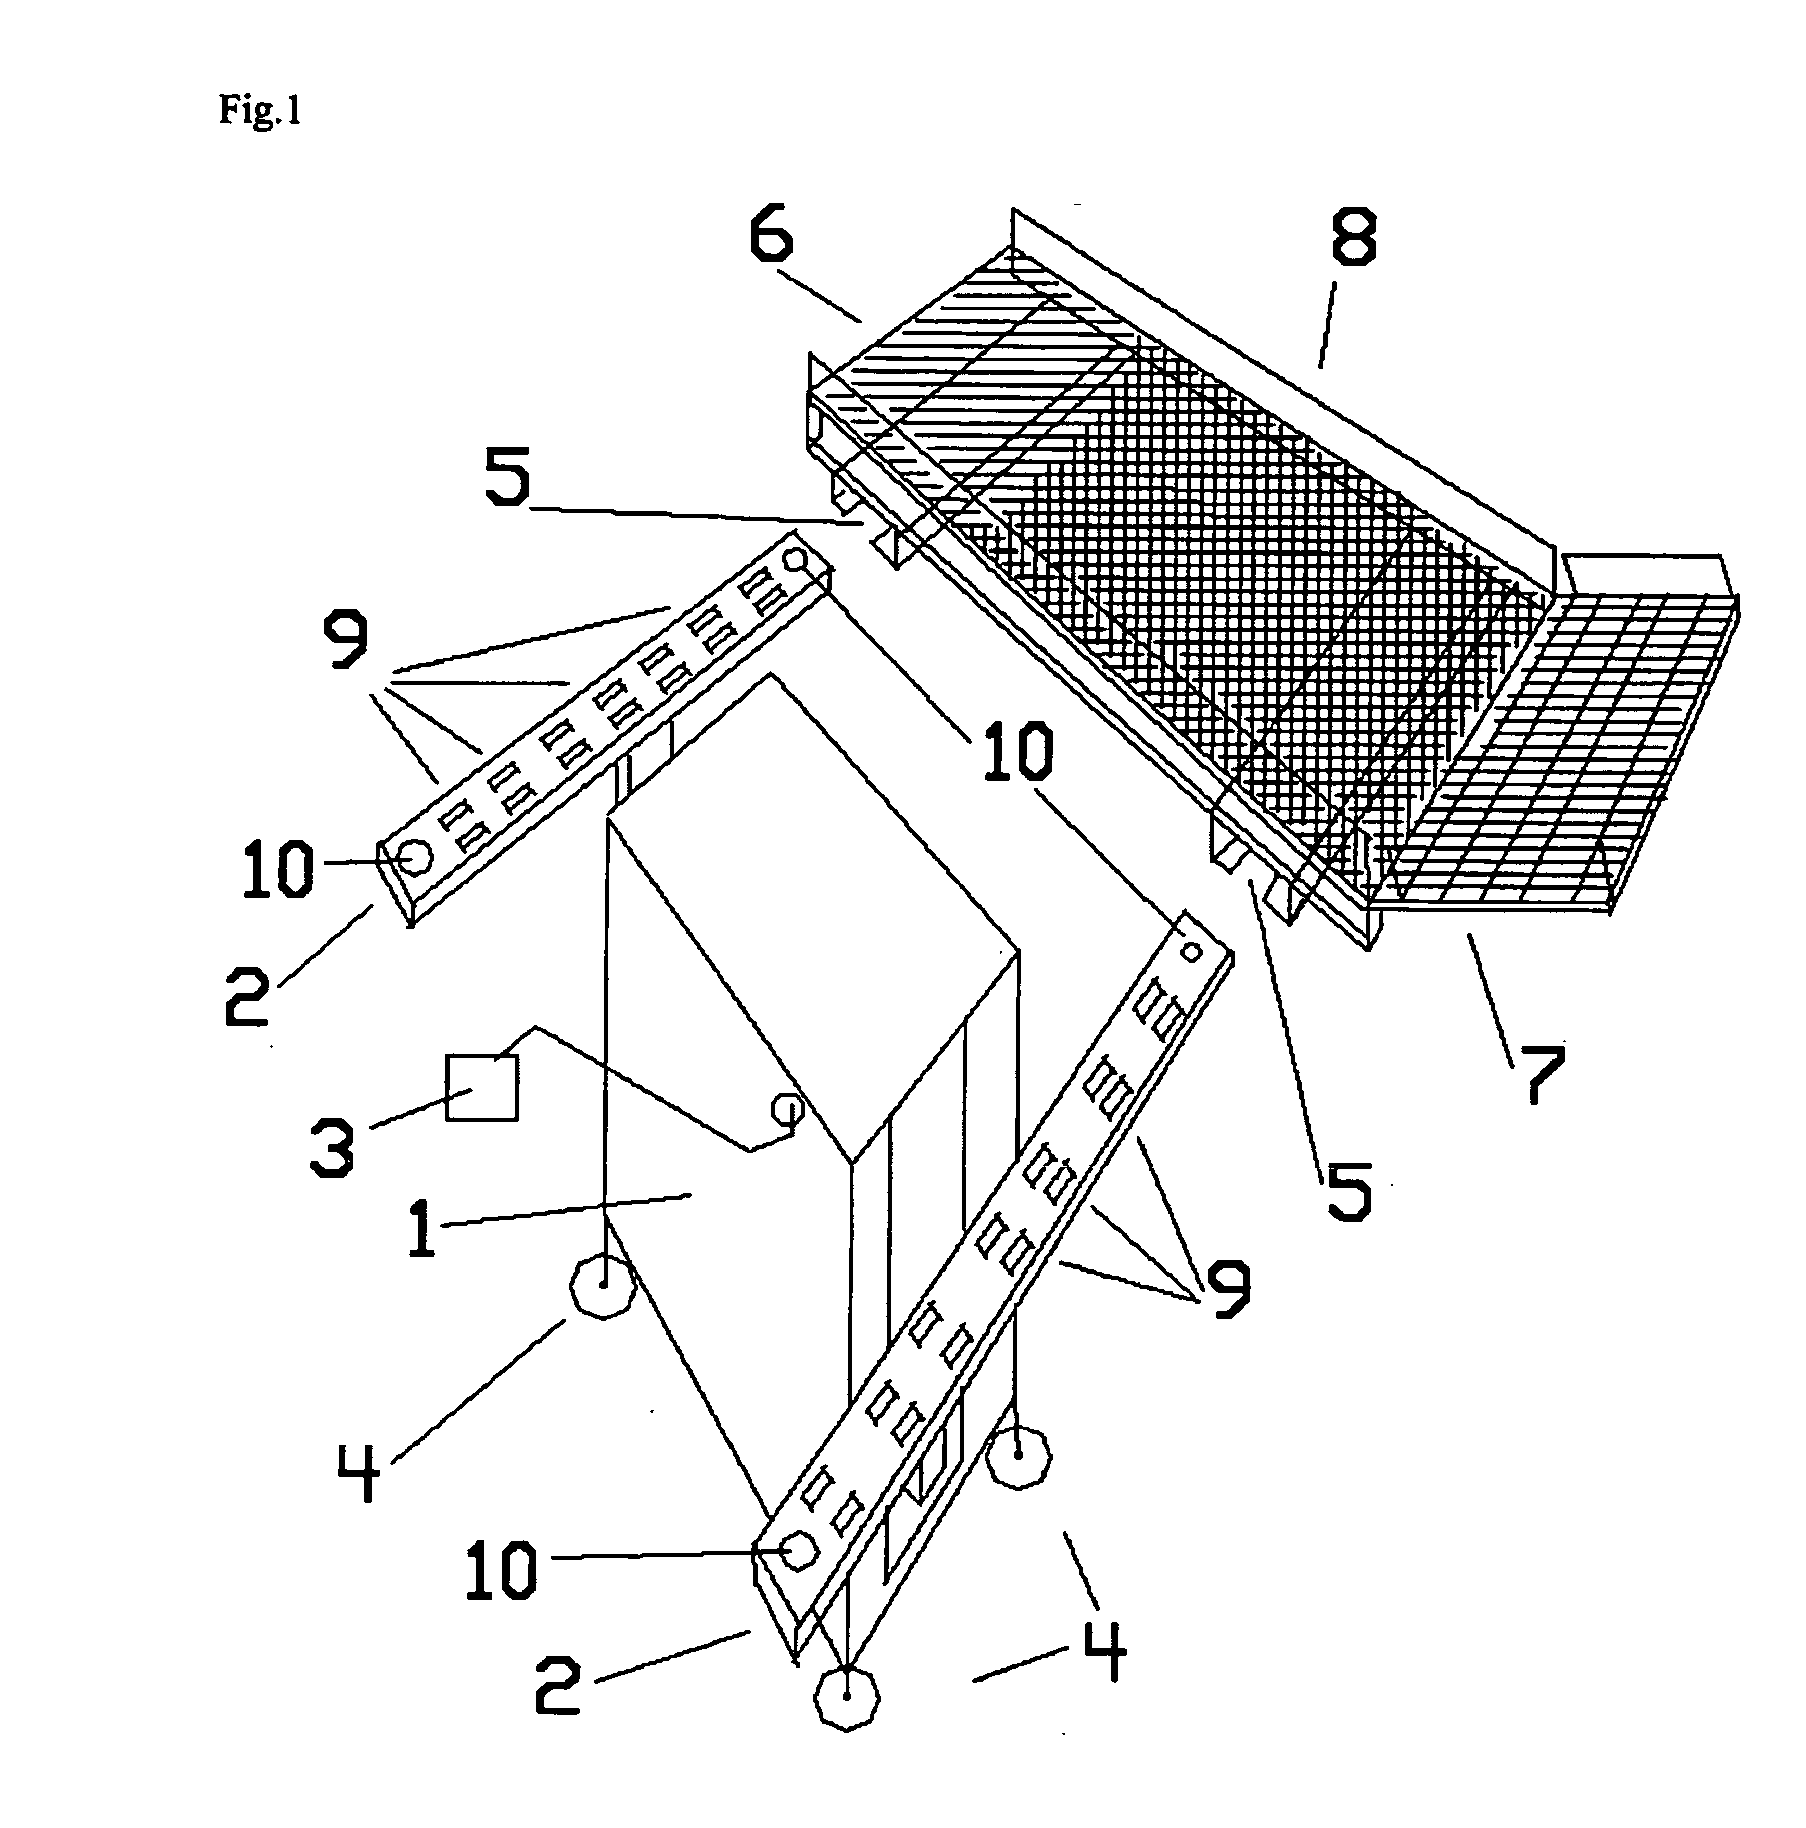 Medical lift and transport system, method and apparatus